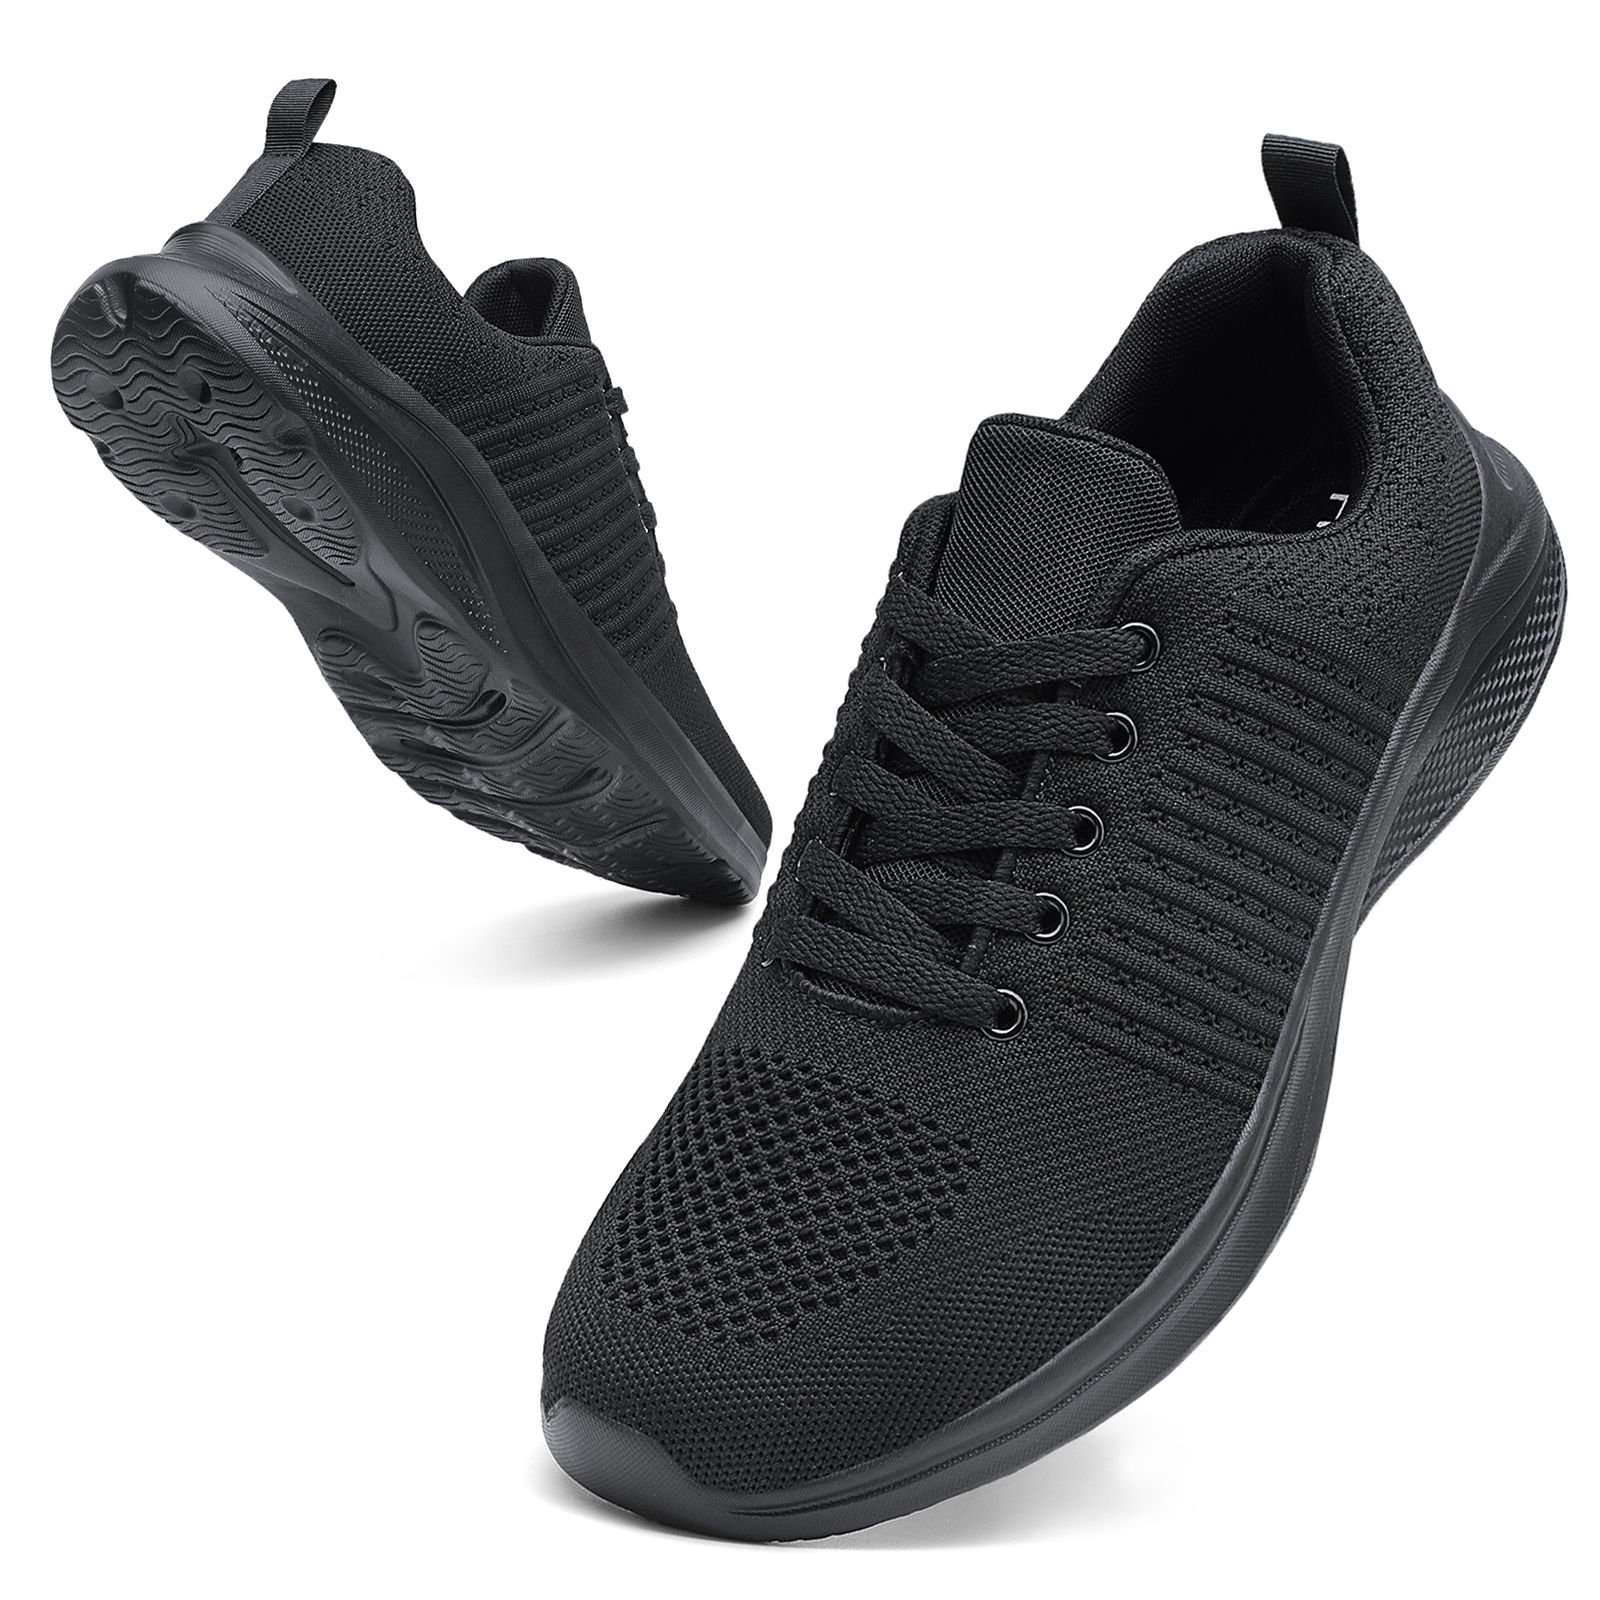 hecodi Walking for Men Wide Shoes Fashion Sneakers Mesh Workout Casual Sports Non Slip Shoes Breathable Tennis Running Athletic Shoes Lightweight Black 12 Wide - image 1 of 9